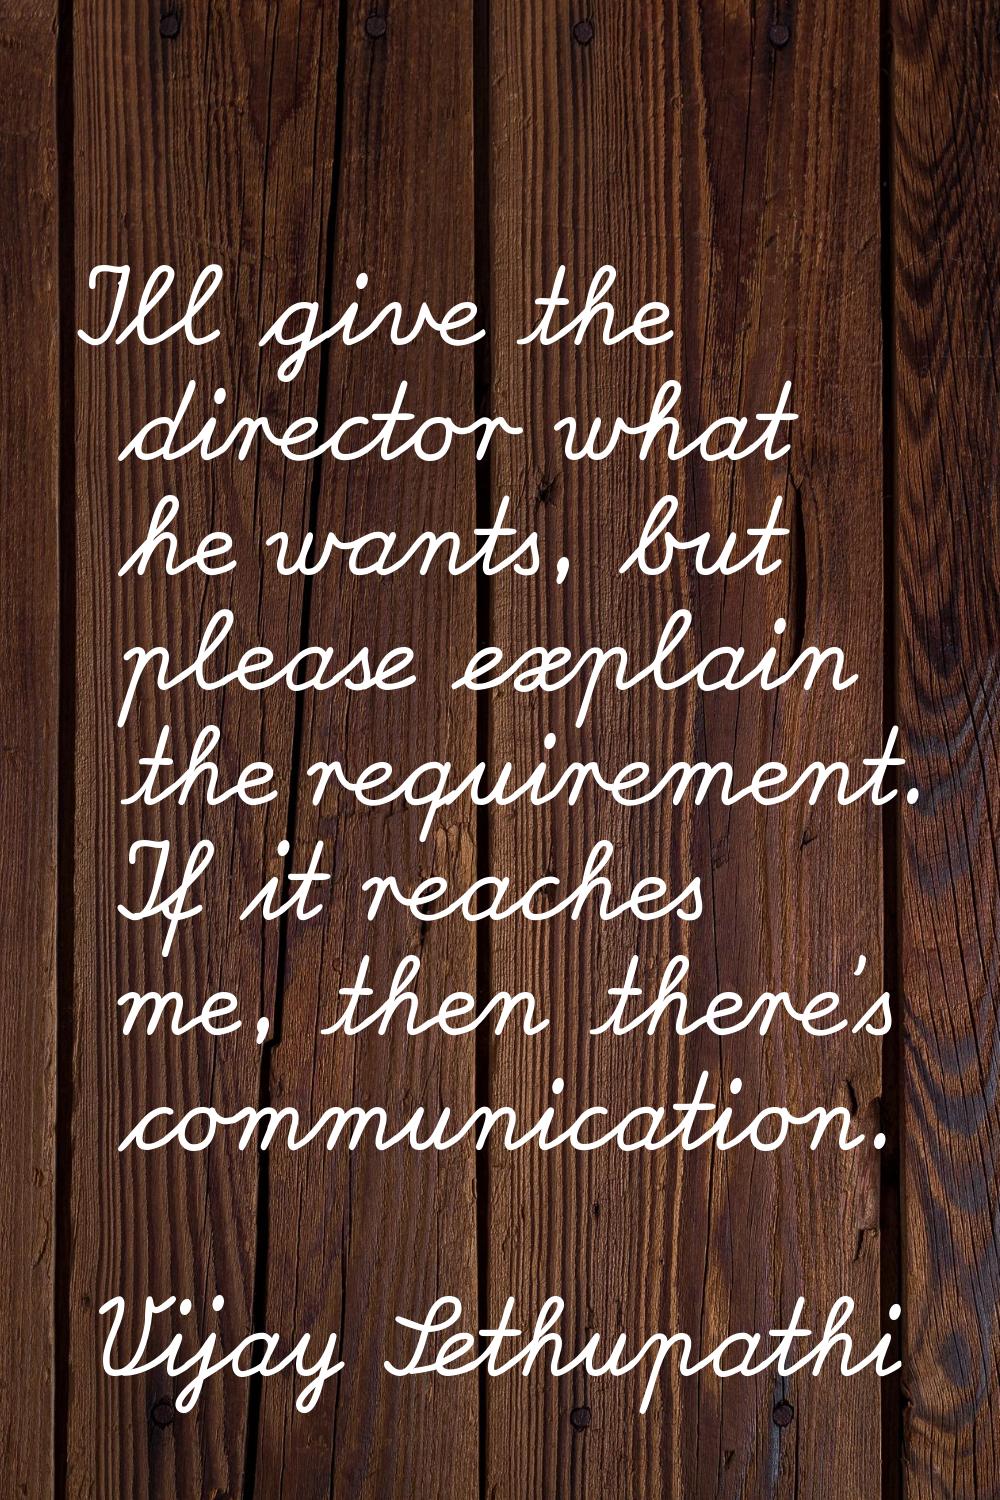 I'll give the director what he wants, but please explain the requirement. If it reaches me, then th